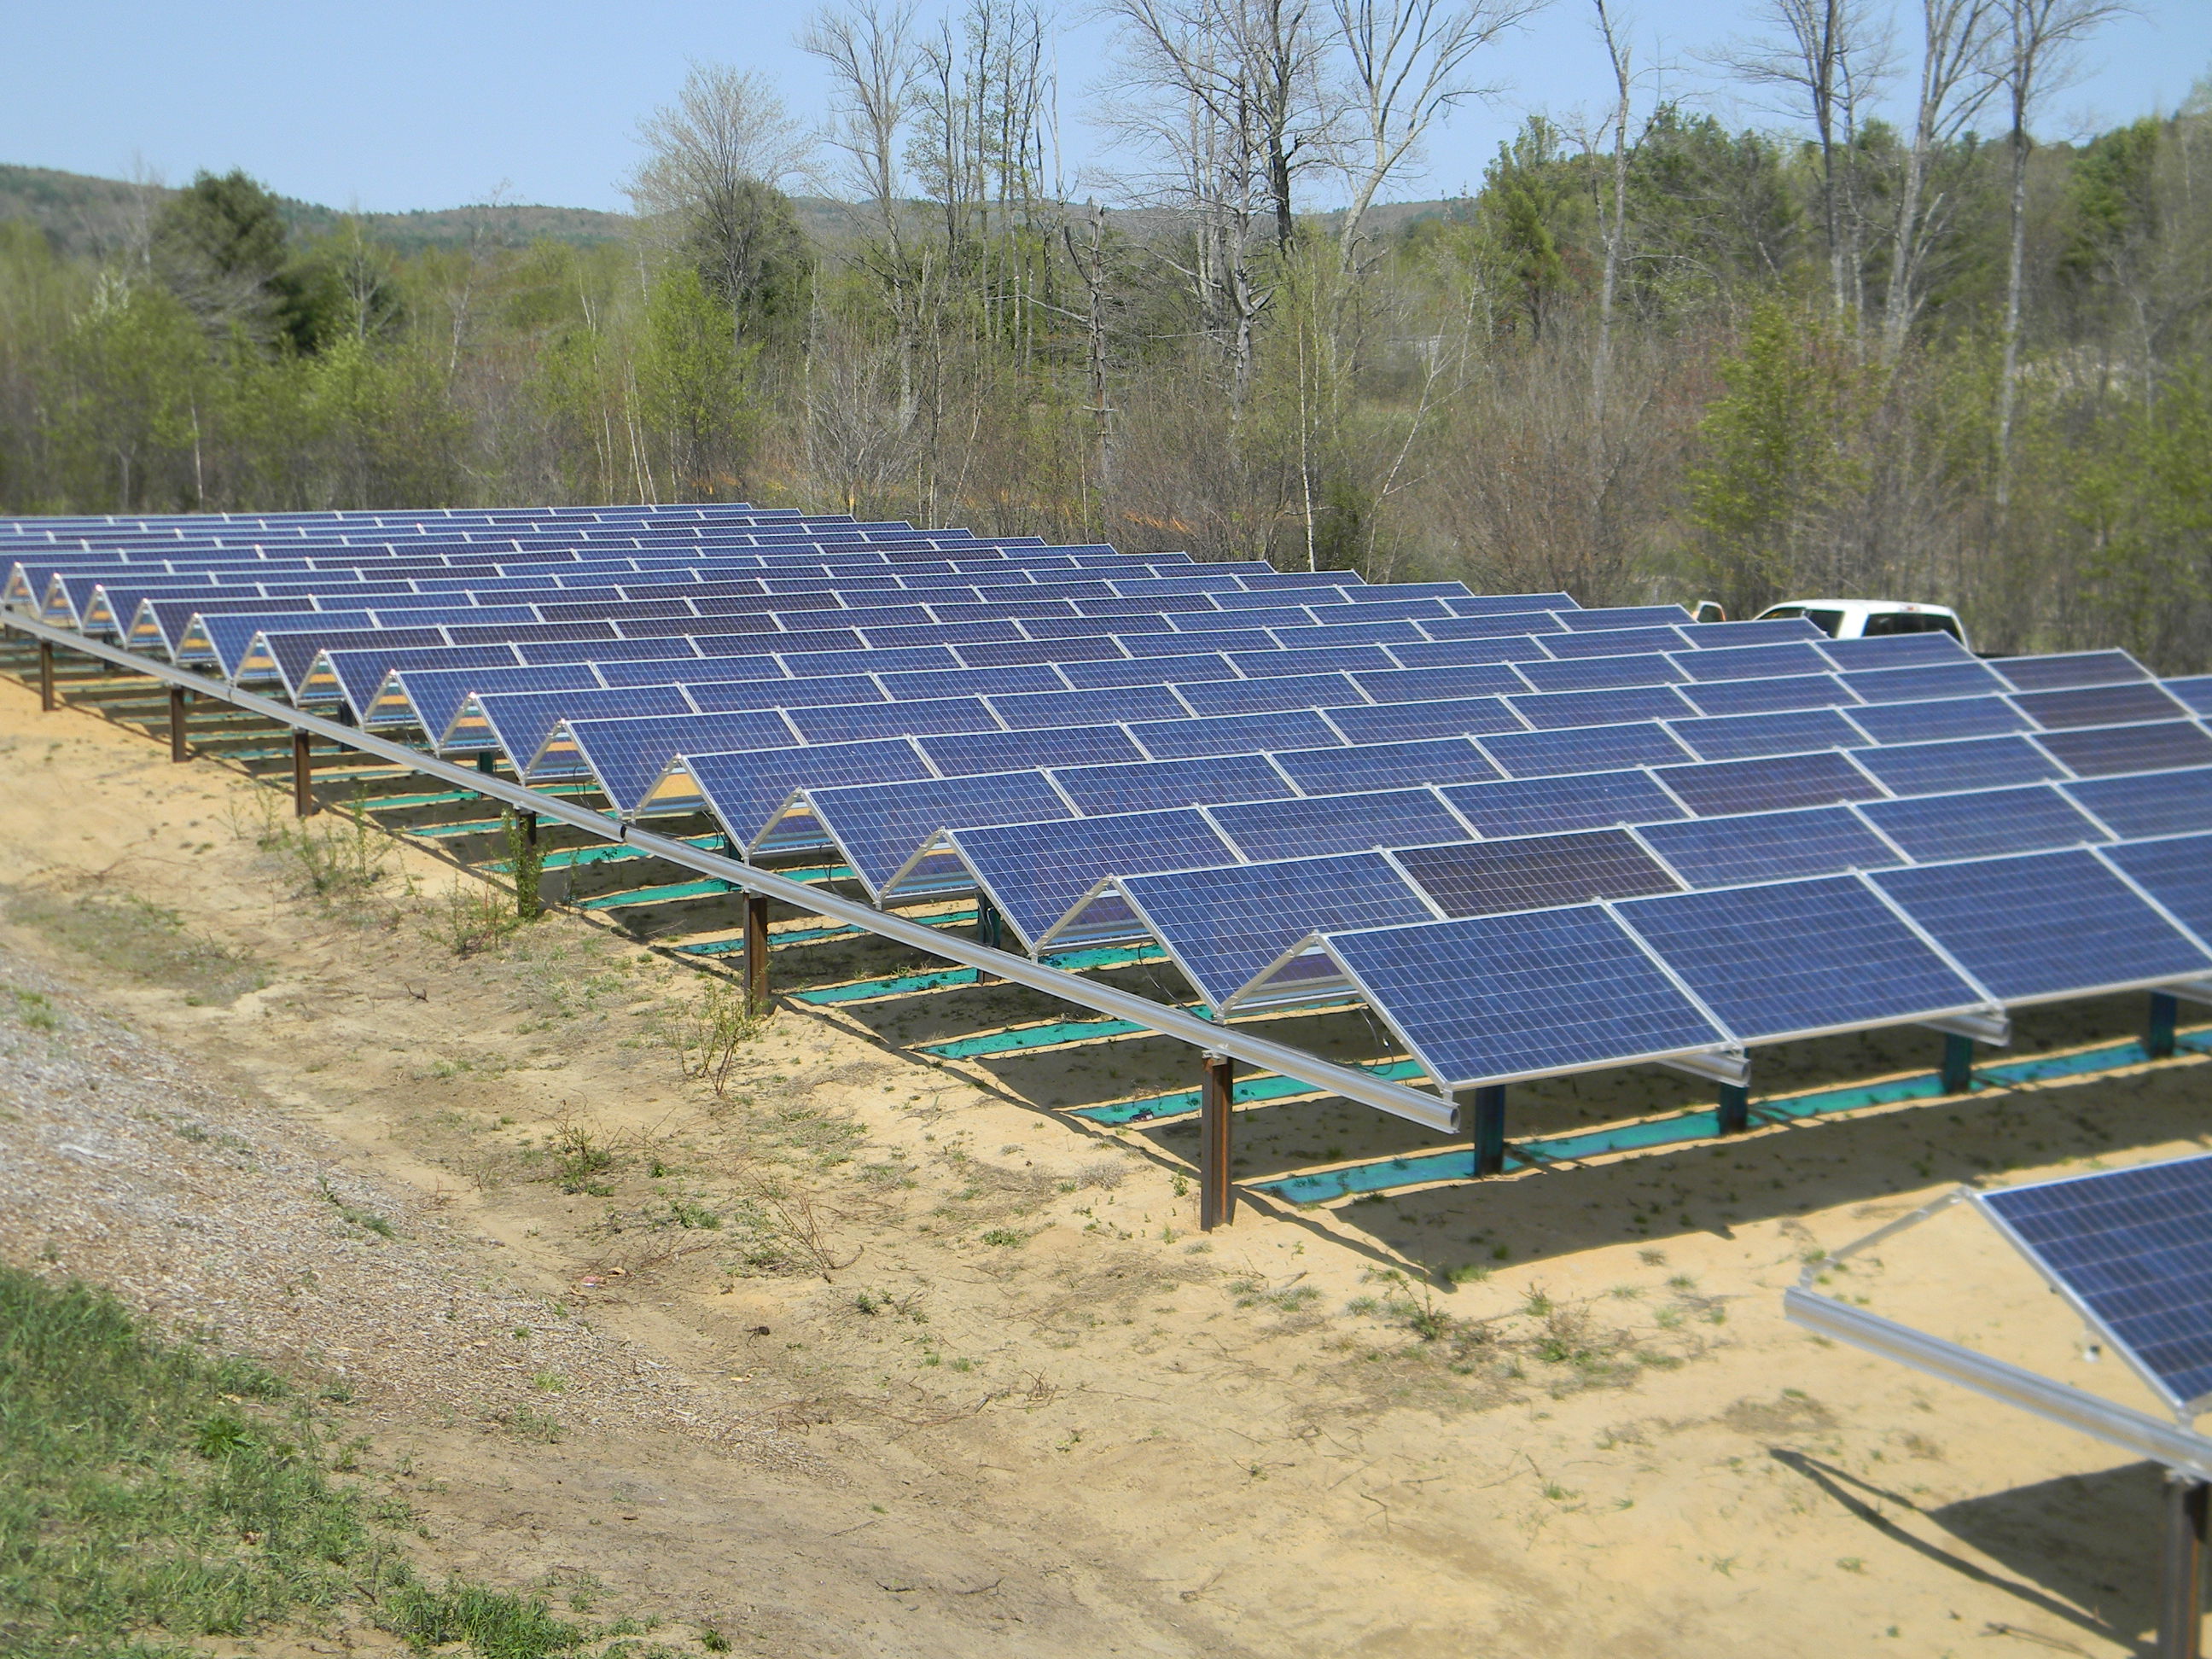 The first solar array was built on Furlone’s property in Spring 2015.